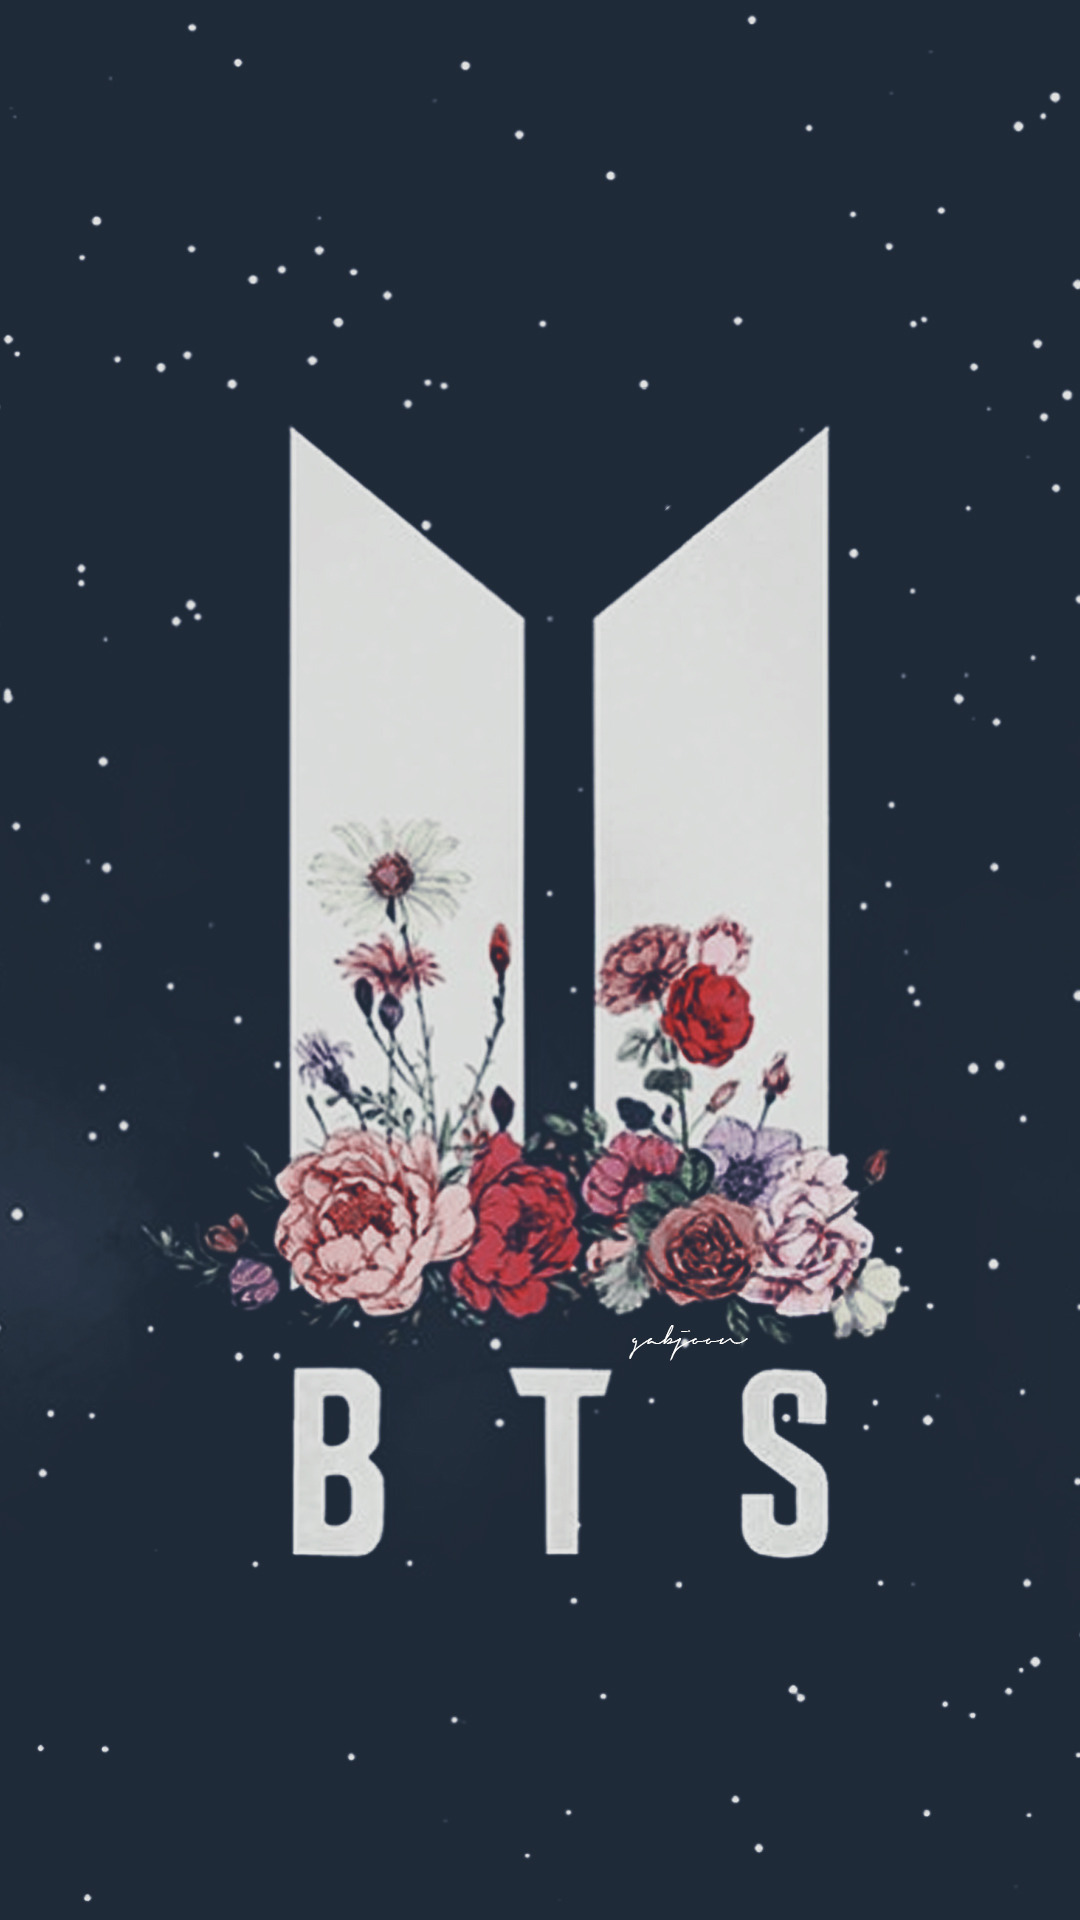 bts army wallpaper,illustration,text,font,poster,graphic design